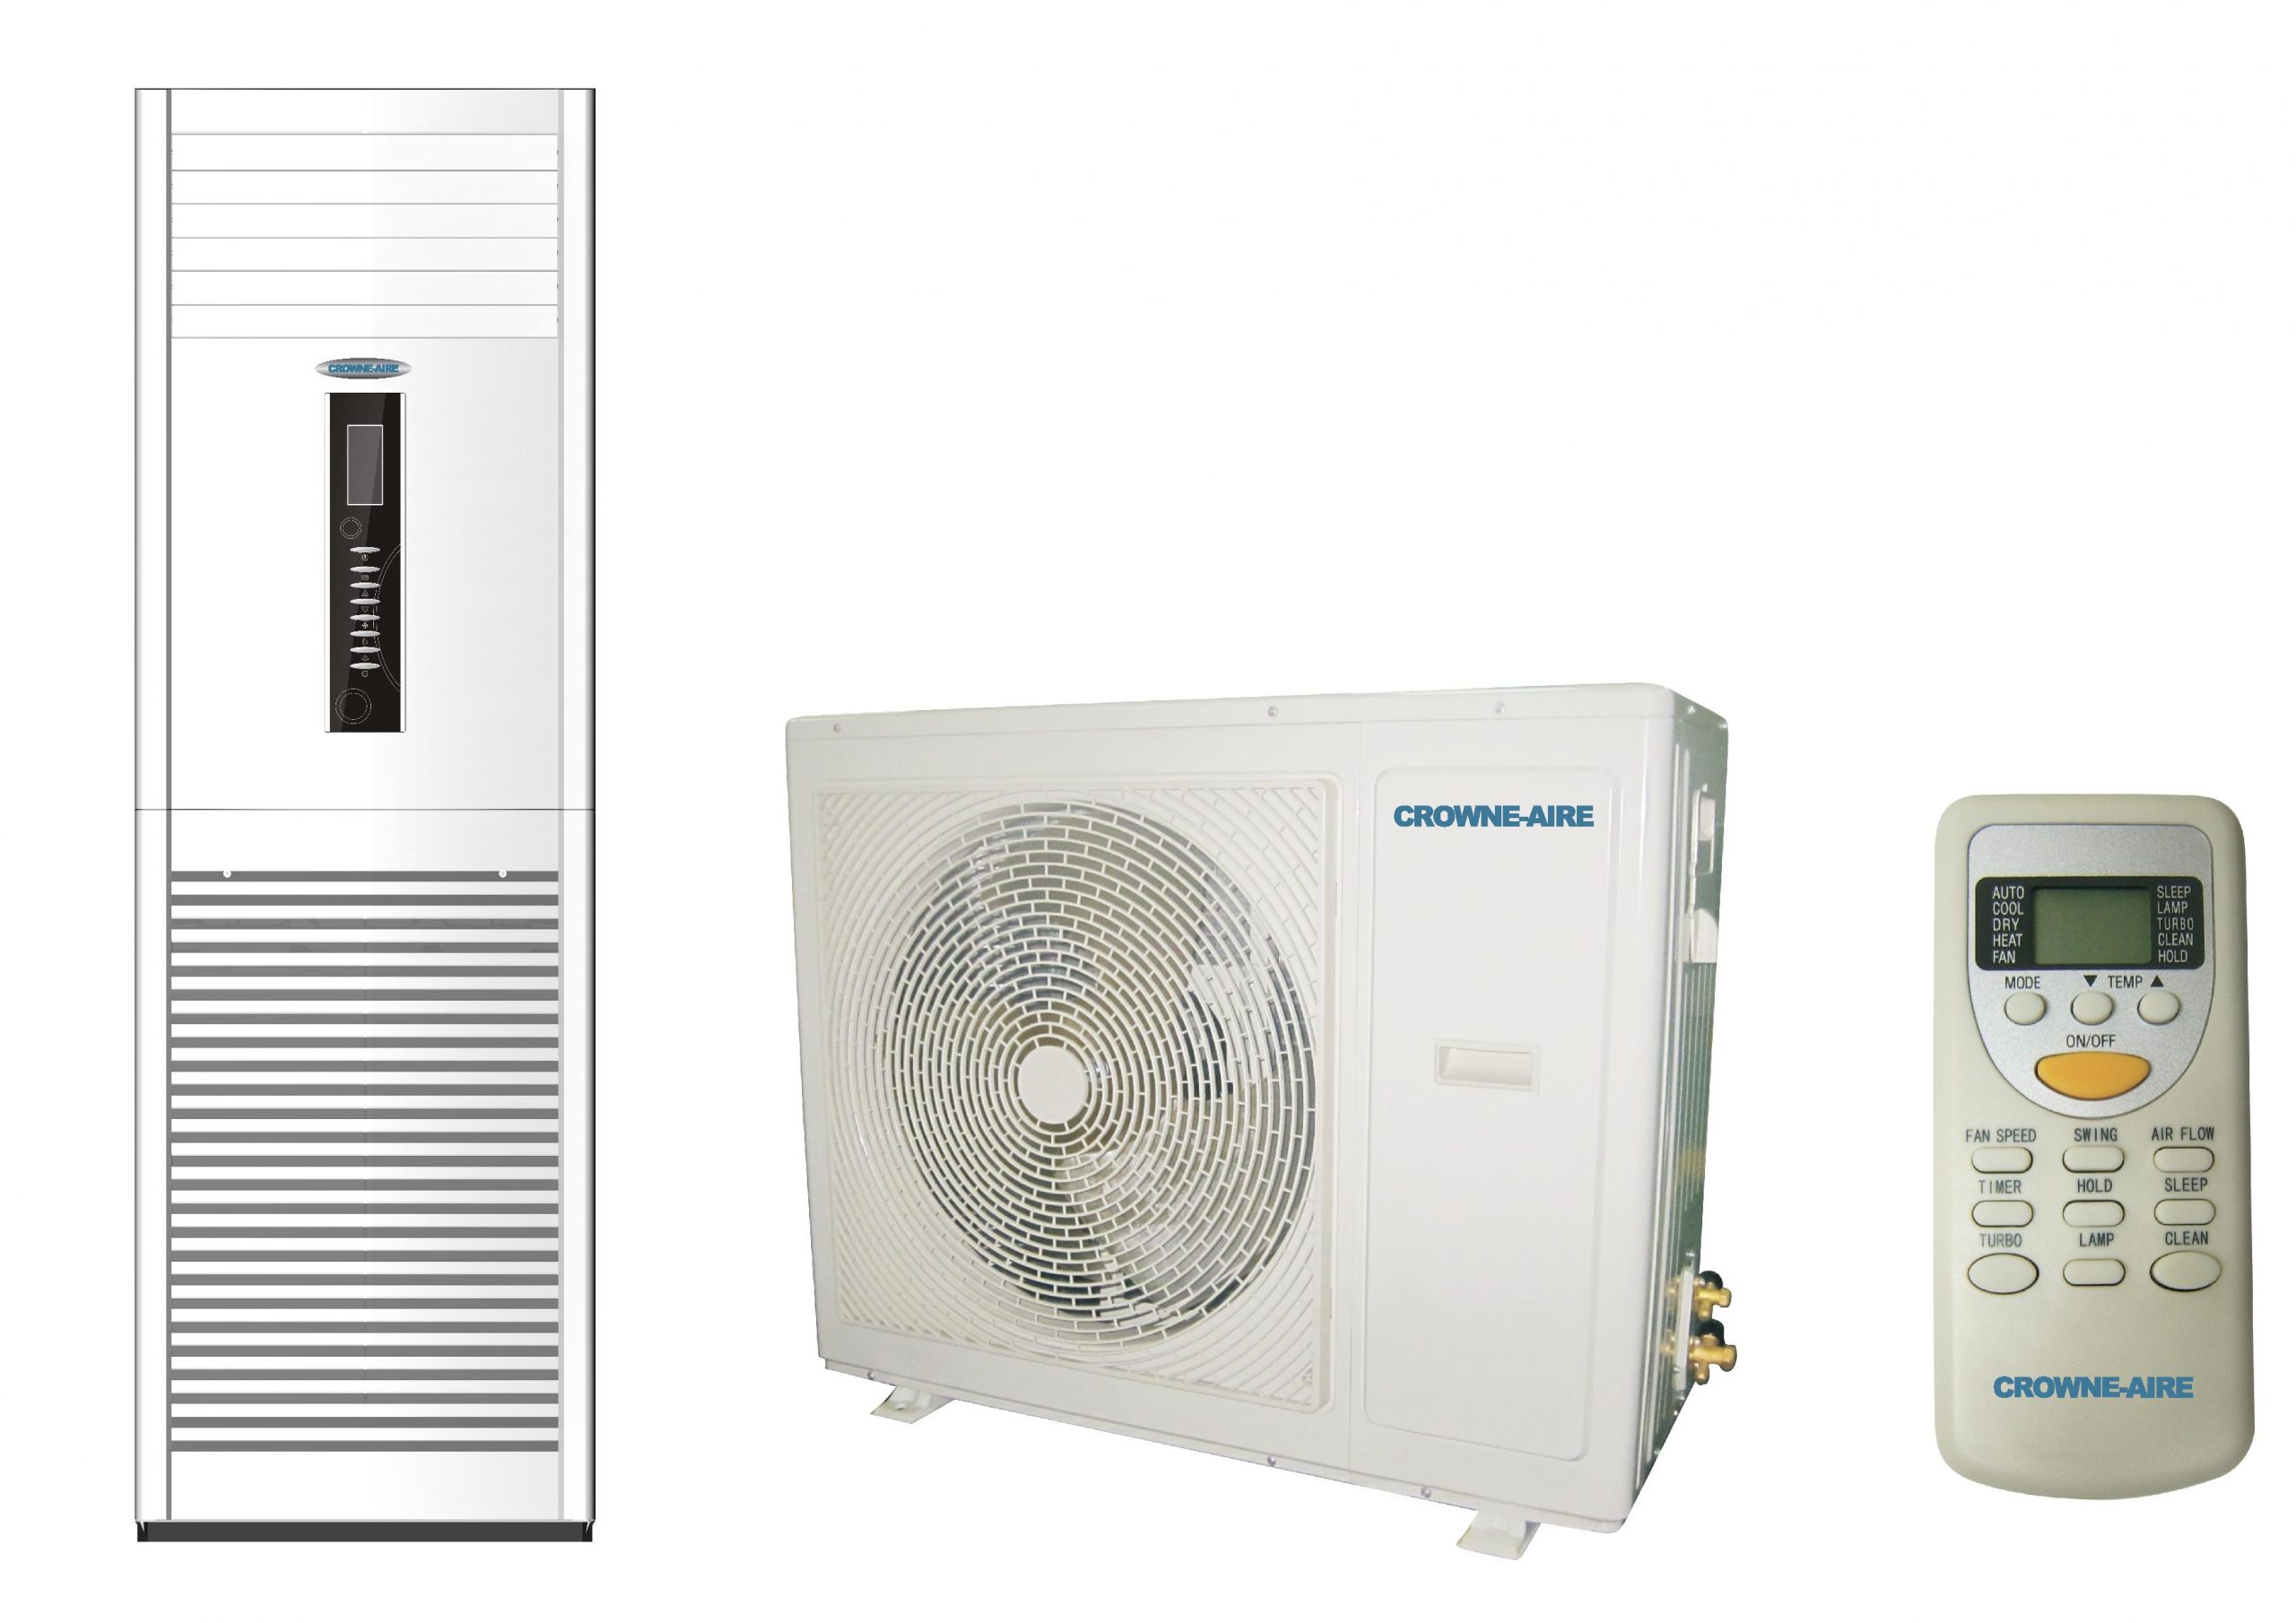 what is the difference between inverter and inverter grade 